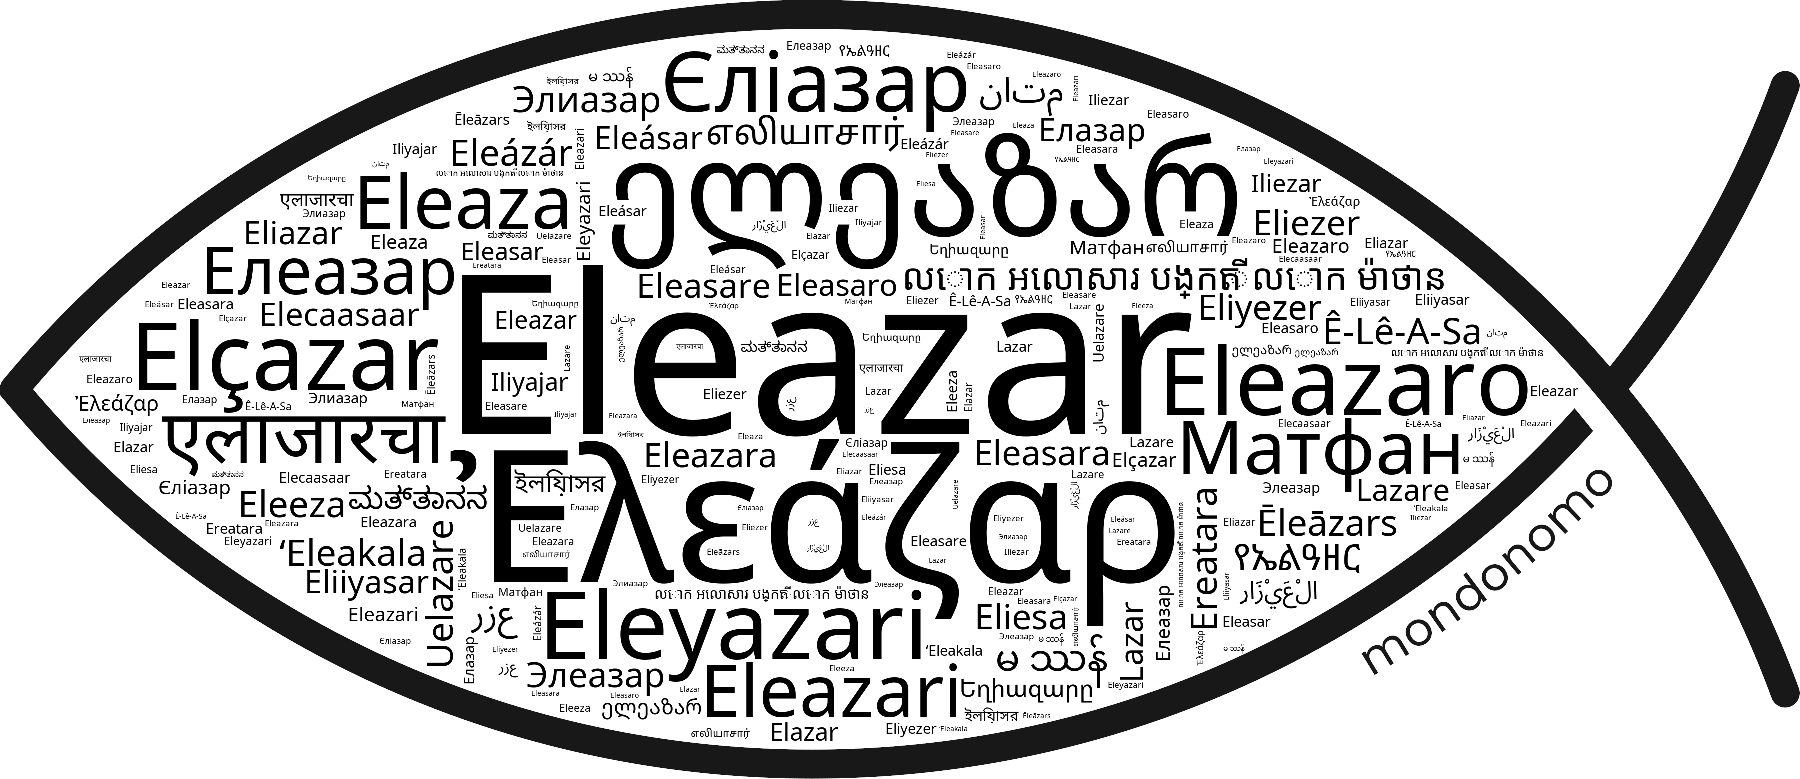 Name Eleazar in the world's Bibles